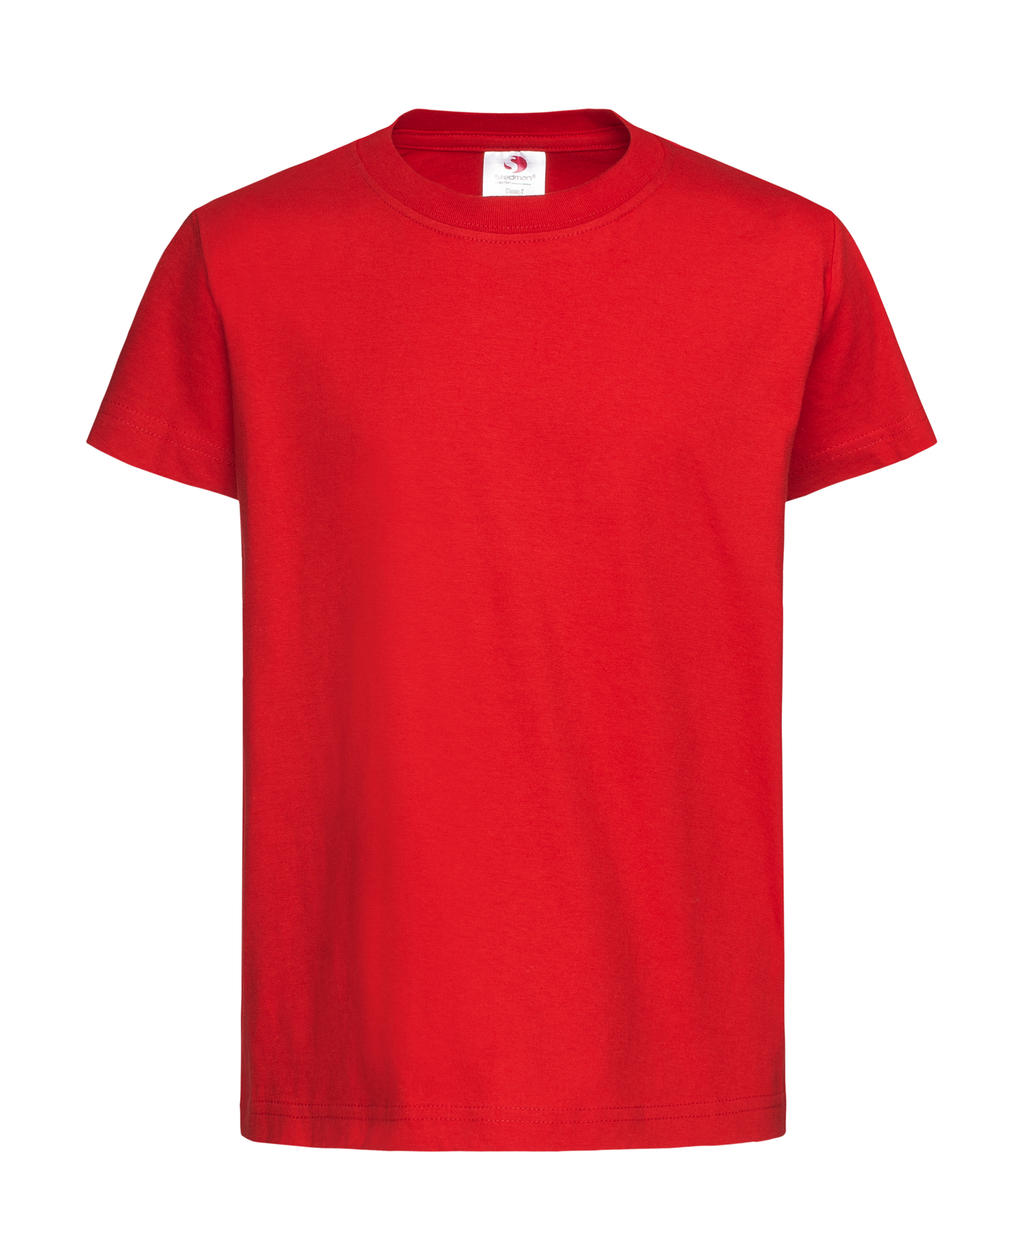  Classic-T Kids in Farbe Scarlet Red